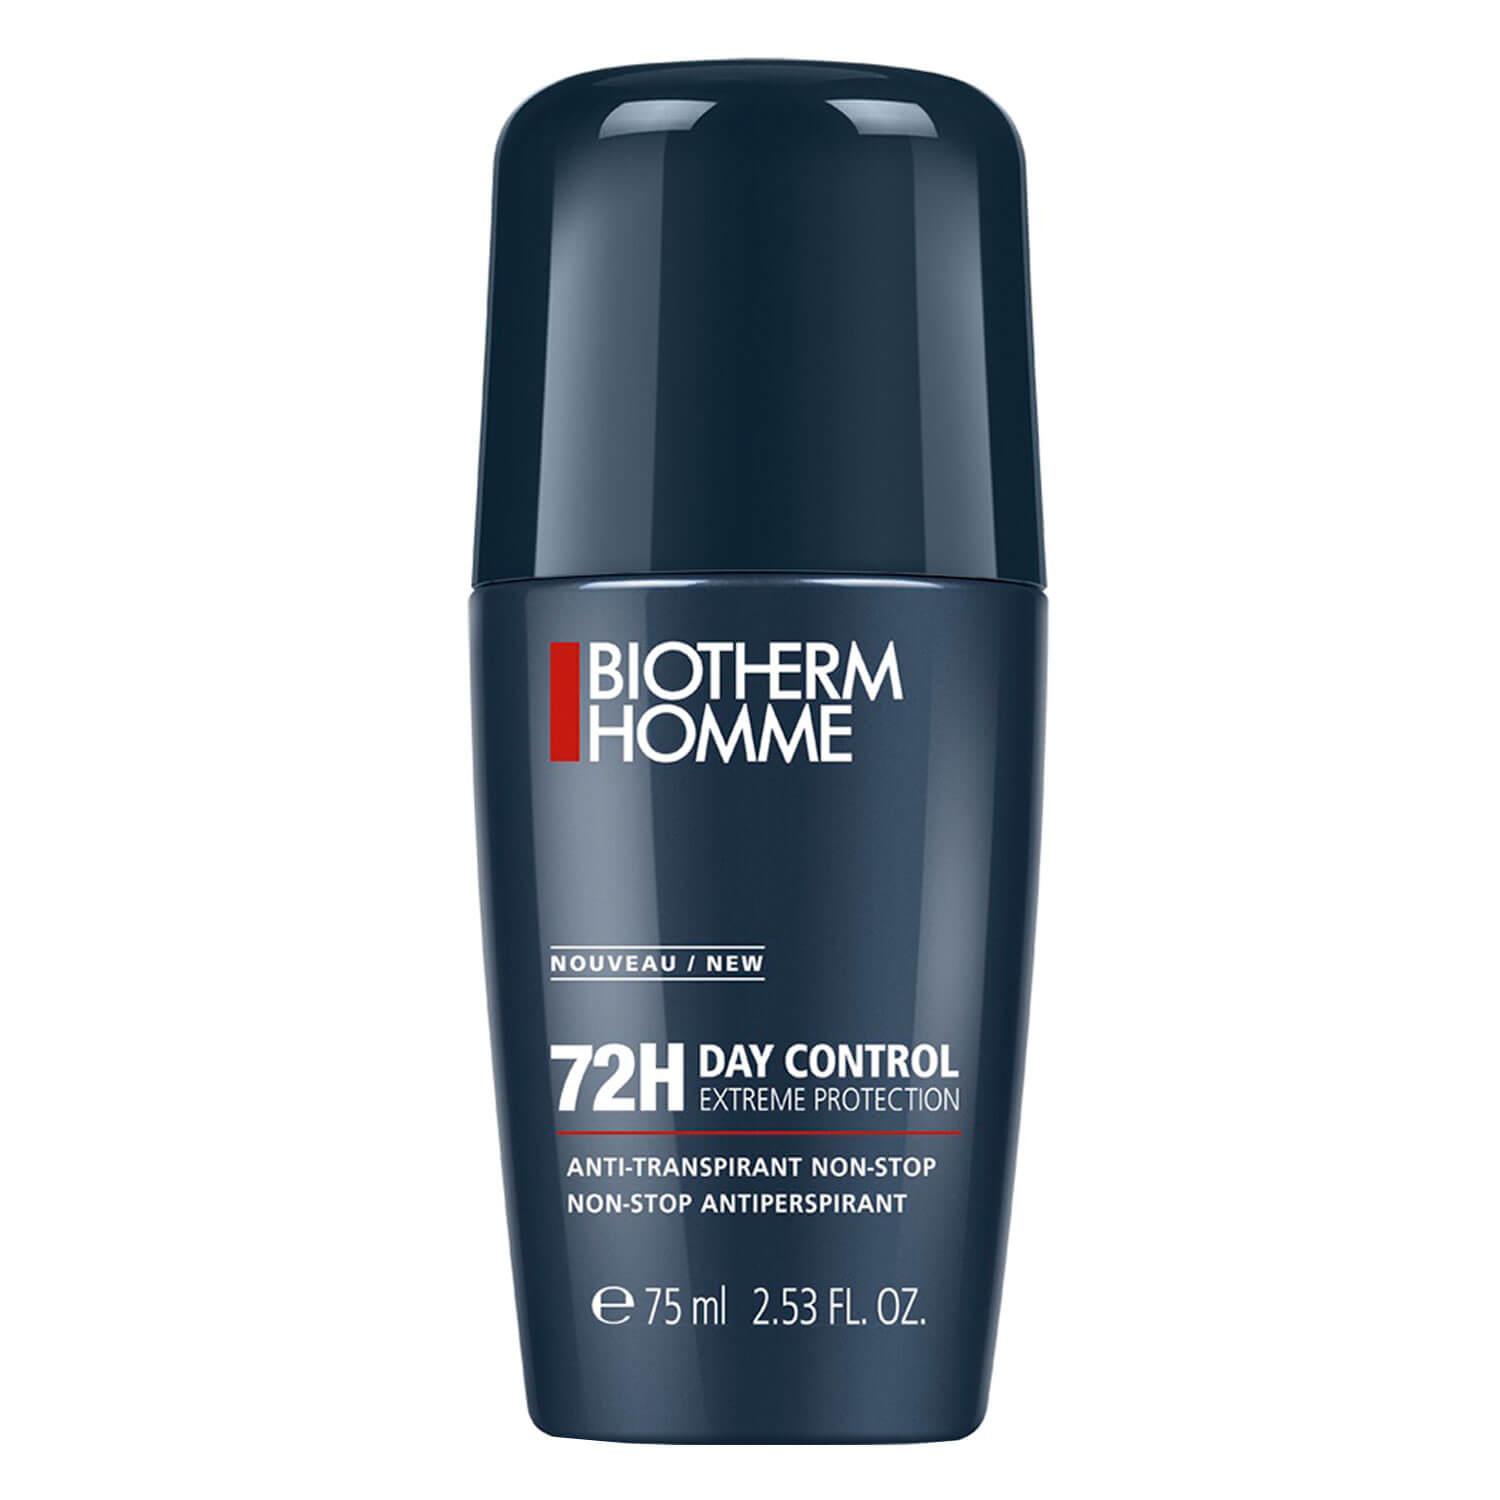 Biotherm Homme - Day Control 72H Extreme Protection